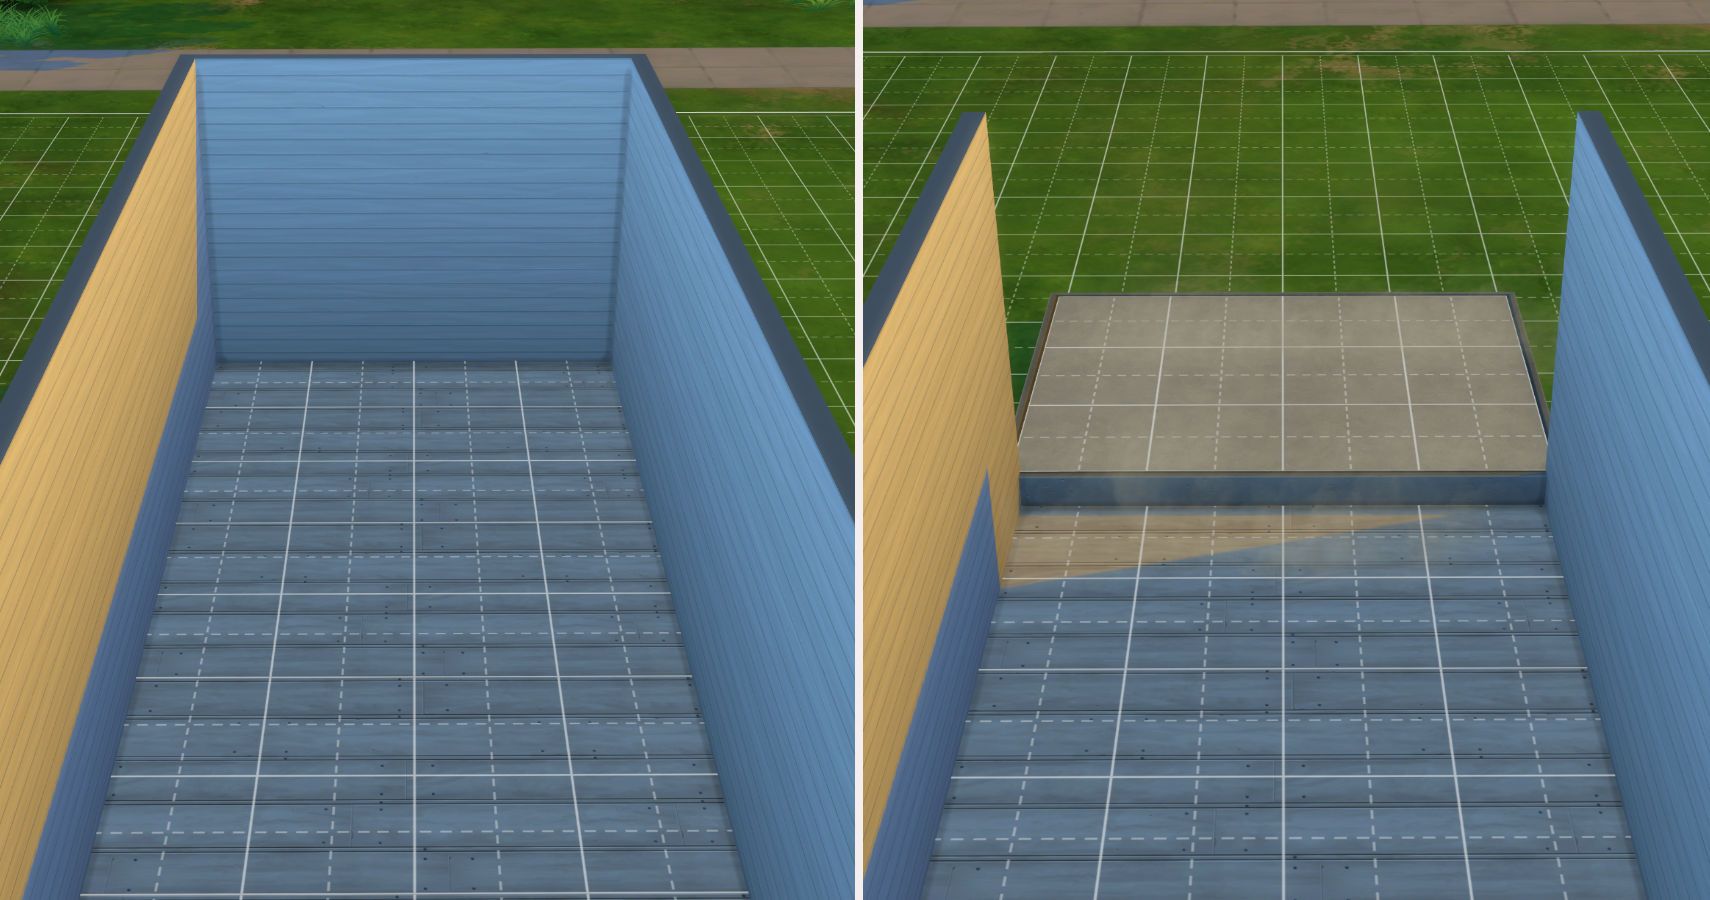 A split image. Left side an empty rectangular room. Right side the same room with a platform and a missing back wall.